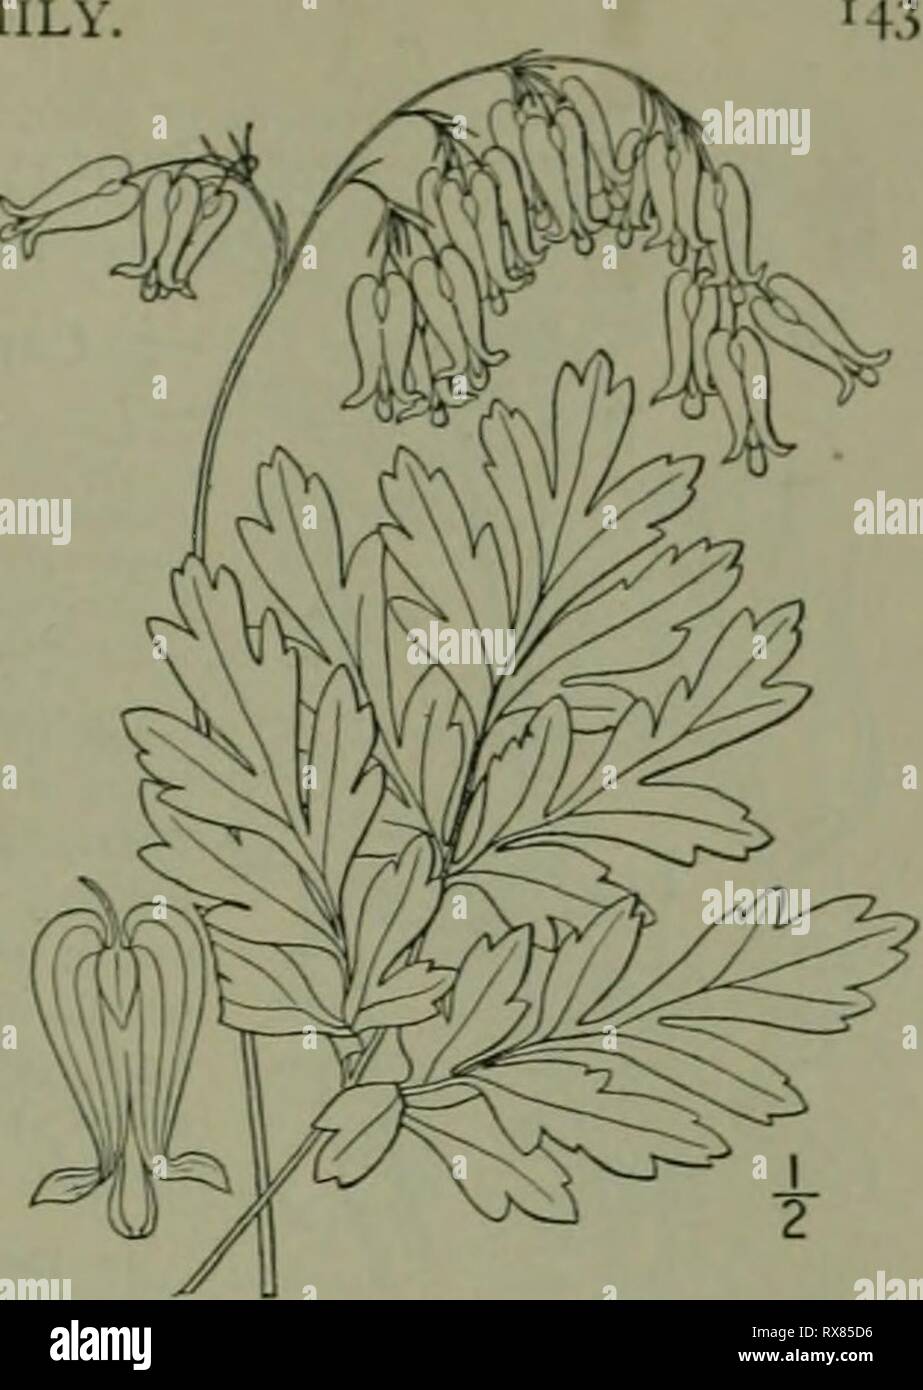 An illustrated flora of the An illustrated flora of the northern United States, Canada and the British possessions : from Newfoundland to the parallel of the southern boundary of Virginia and from the Atlantic Ocean westward to the 102nd meridian ed2illustratedflo02brit Year: 1913  Genus i. FUMEWORT FAMILY. 3, Bicuculla eximia (Ker) Millsp. Wild Bleeding-heart. Fig. 1987. Fumaria eximia Ker. Bot. Reg. i: fl. so. 1815. Diclytra eximia DC. Syst. 2: 109. 1821. Dicenira eximia Torr. FI. N. Y. i: 46. 1843. Bicuculla eximia Millsp. Bull. West Va. Agric. Exp. Sta. 2: 327. 1892. Glabrous, somewhat gla Stock Photo